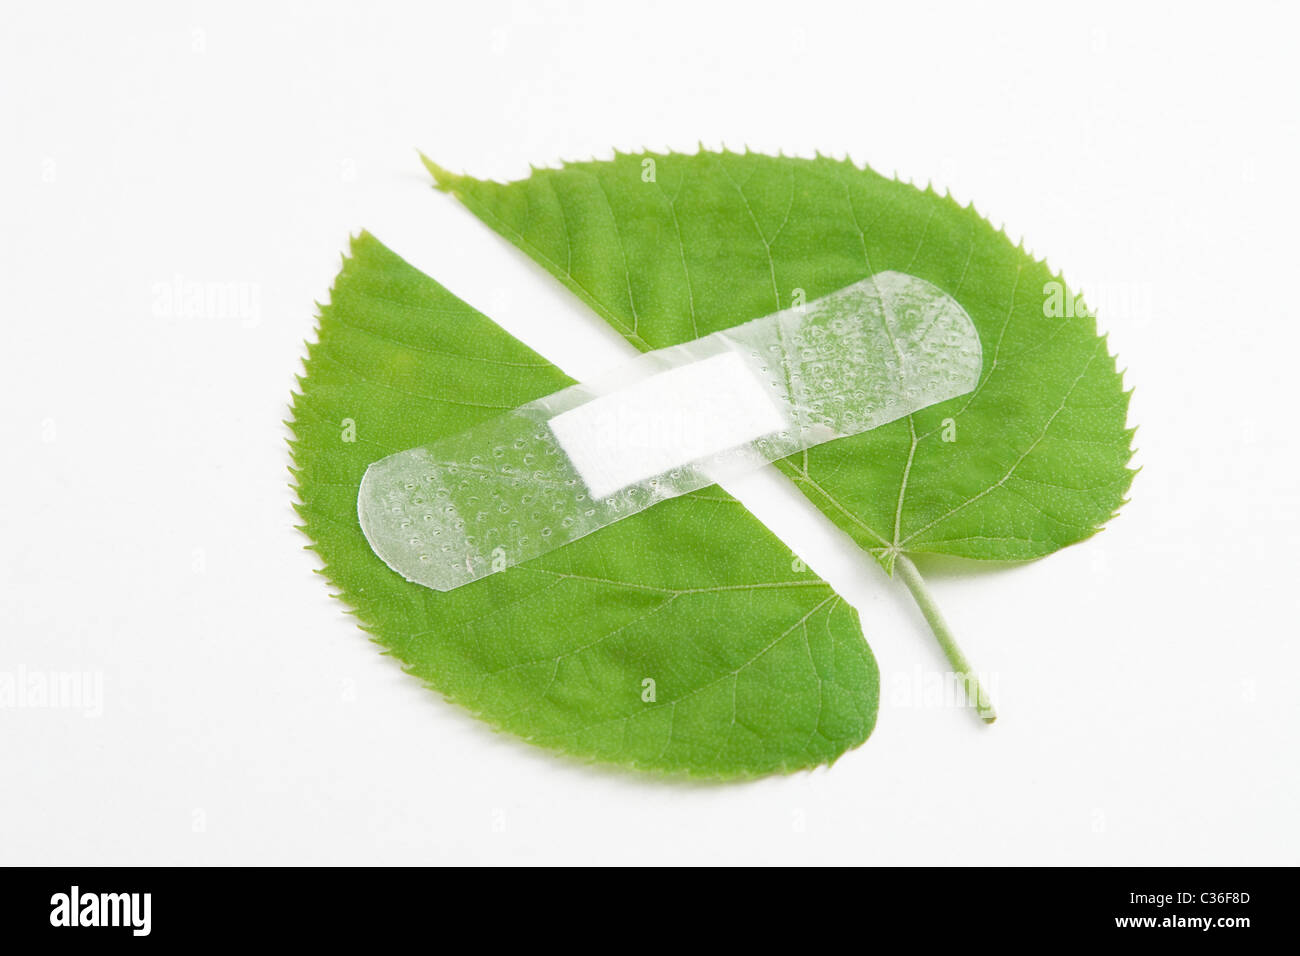 environment protection, green leaf bandaged with white patch Stock Photo